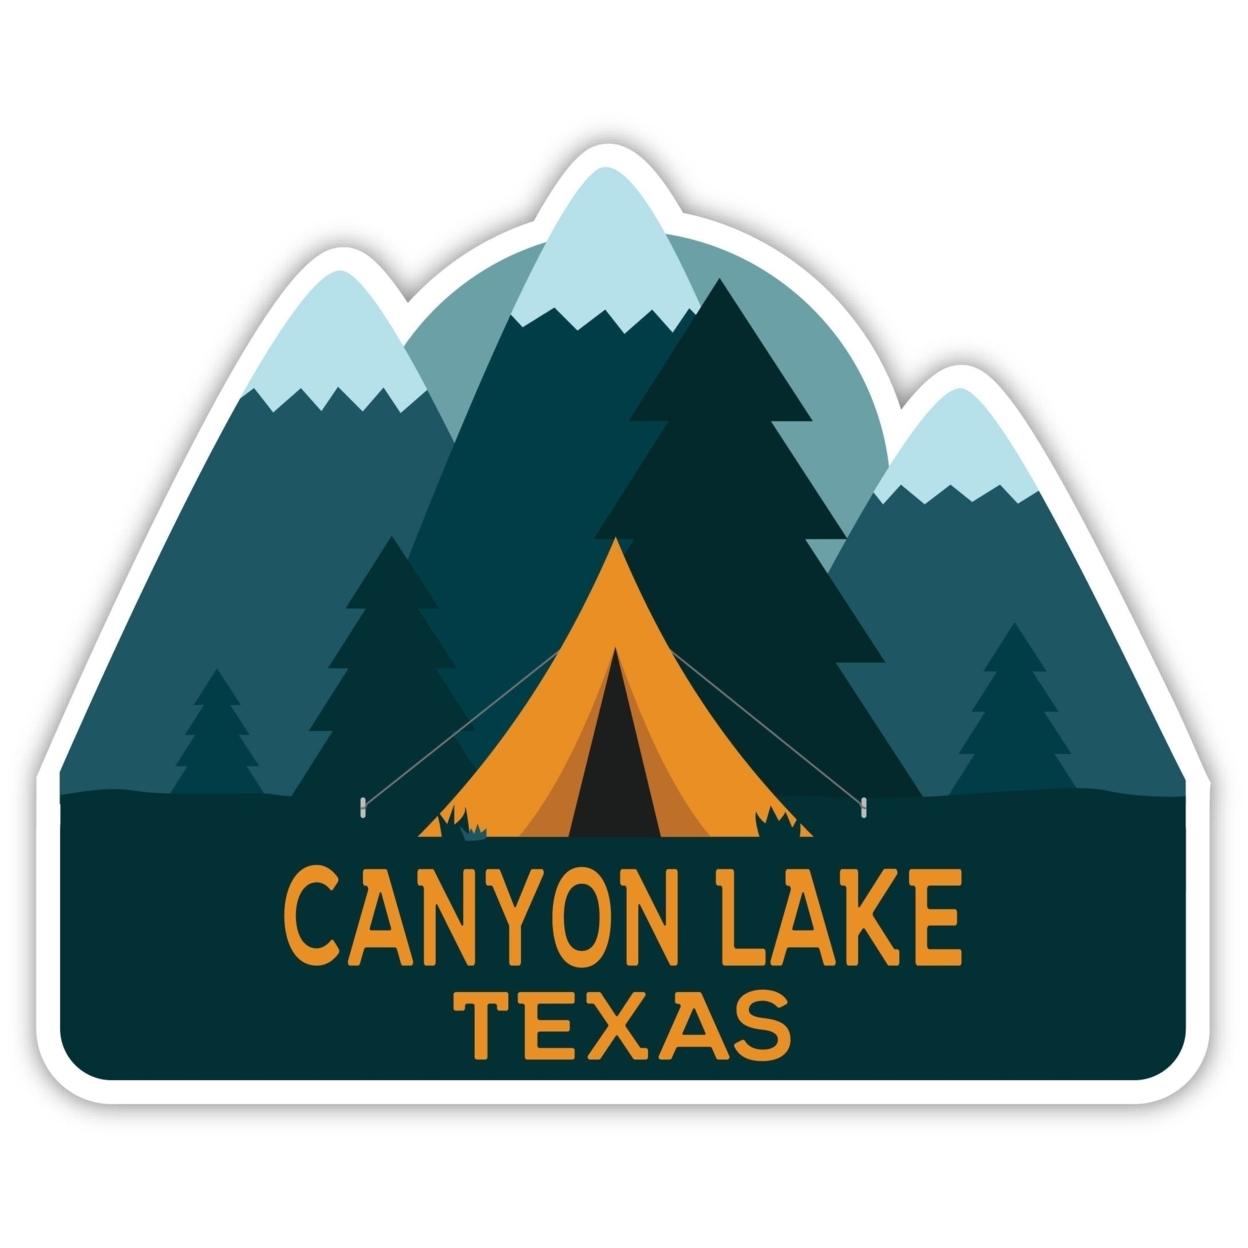 Canyon Lake Texas Souvenir Decorative Stickers (Choose Theme And Size) - 4-Pack, 12-Inch, Adventures Awaits